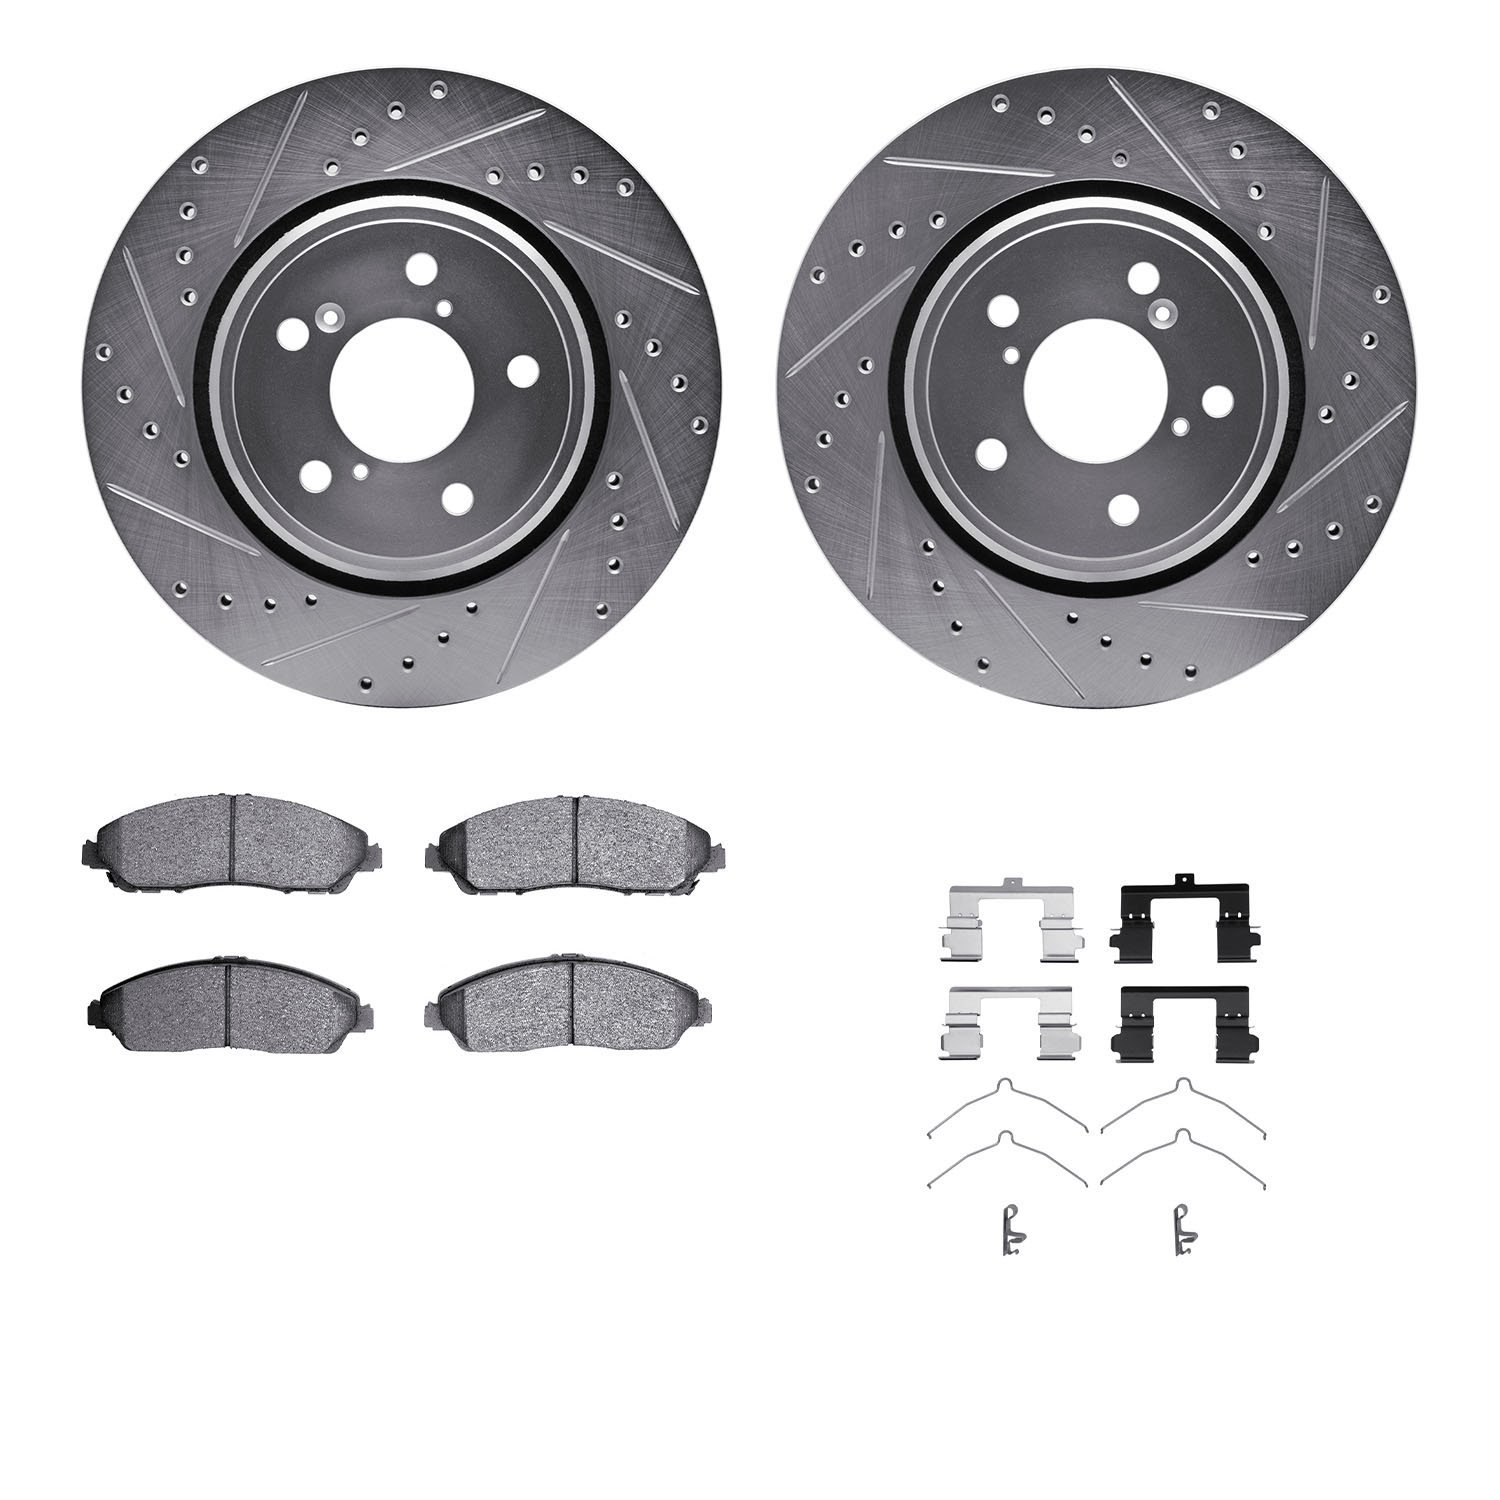 7312-59101 Drilled/Slotted Brake Rotor with 3000-Series Ceramic Brake Pads Kit & Hardware [Silver], Fits Select Acura/Honda, Pos